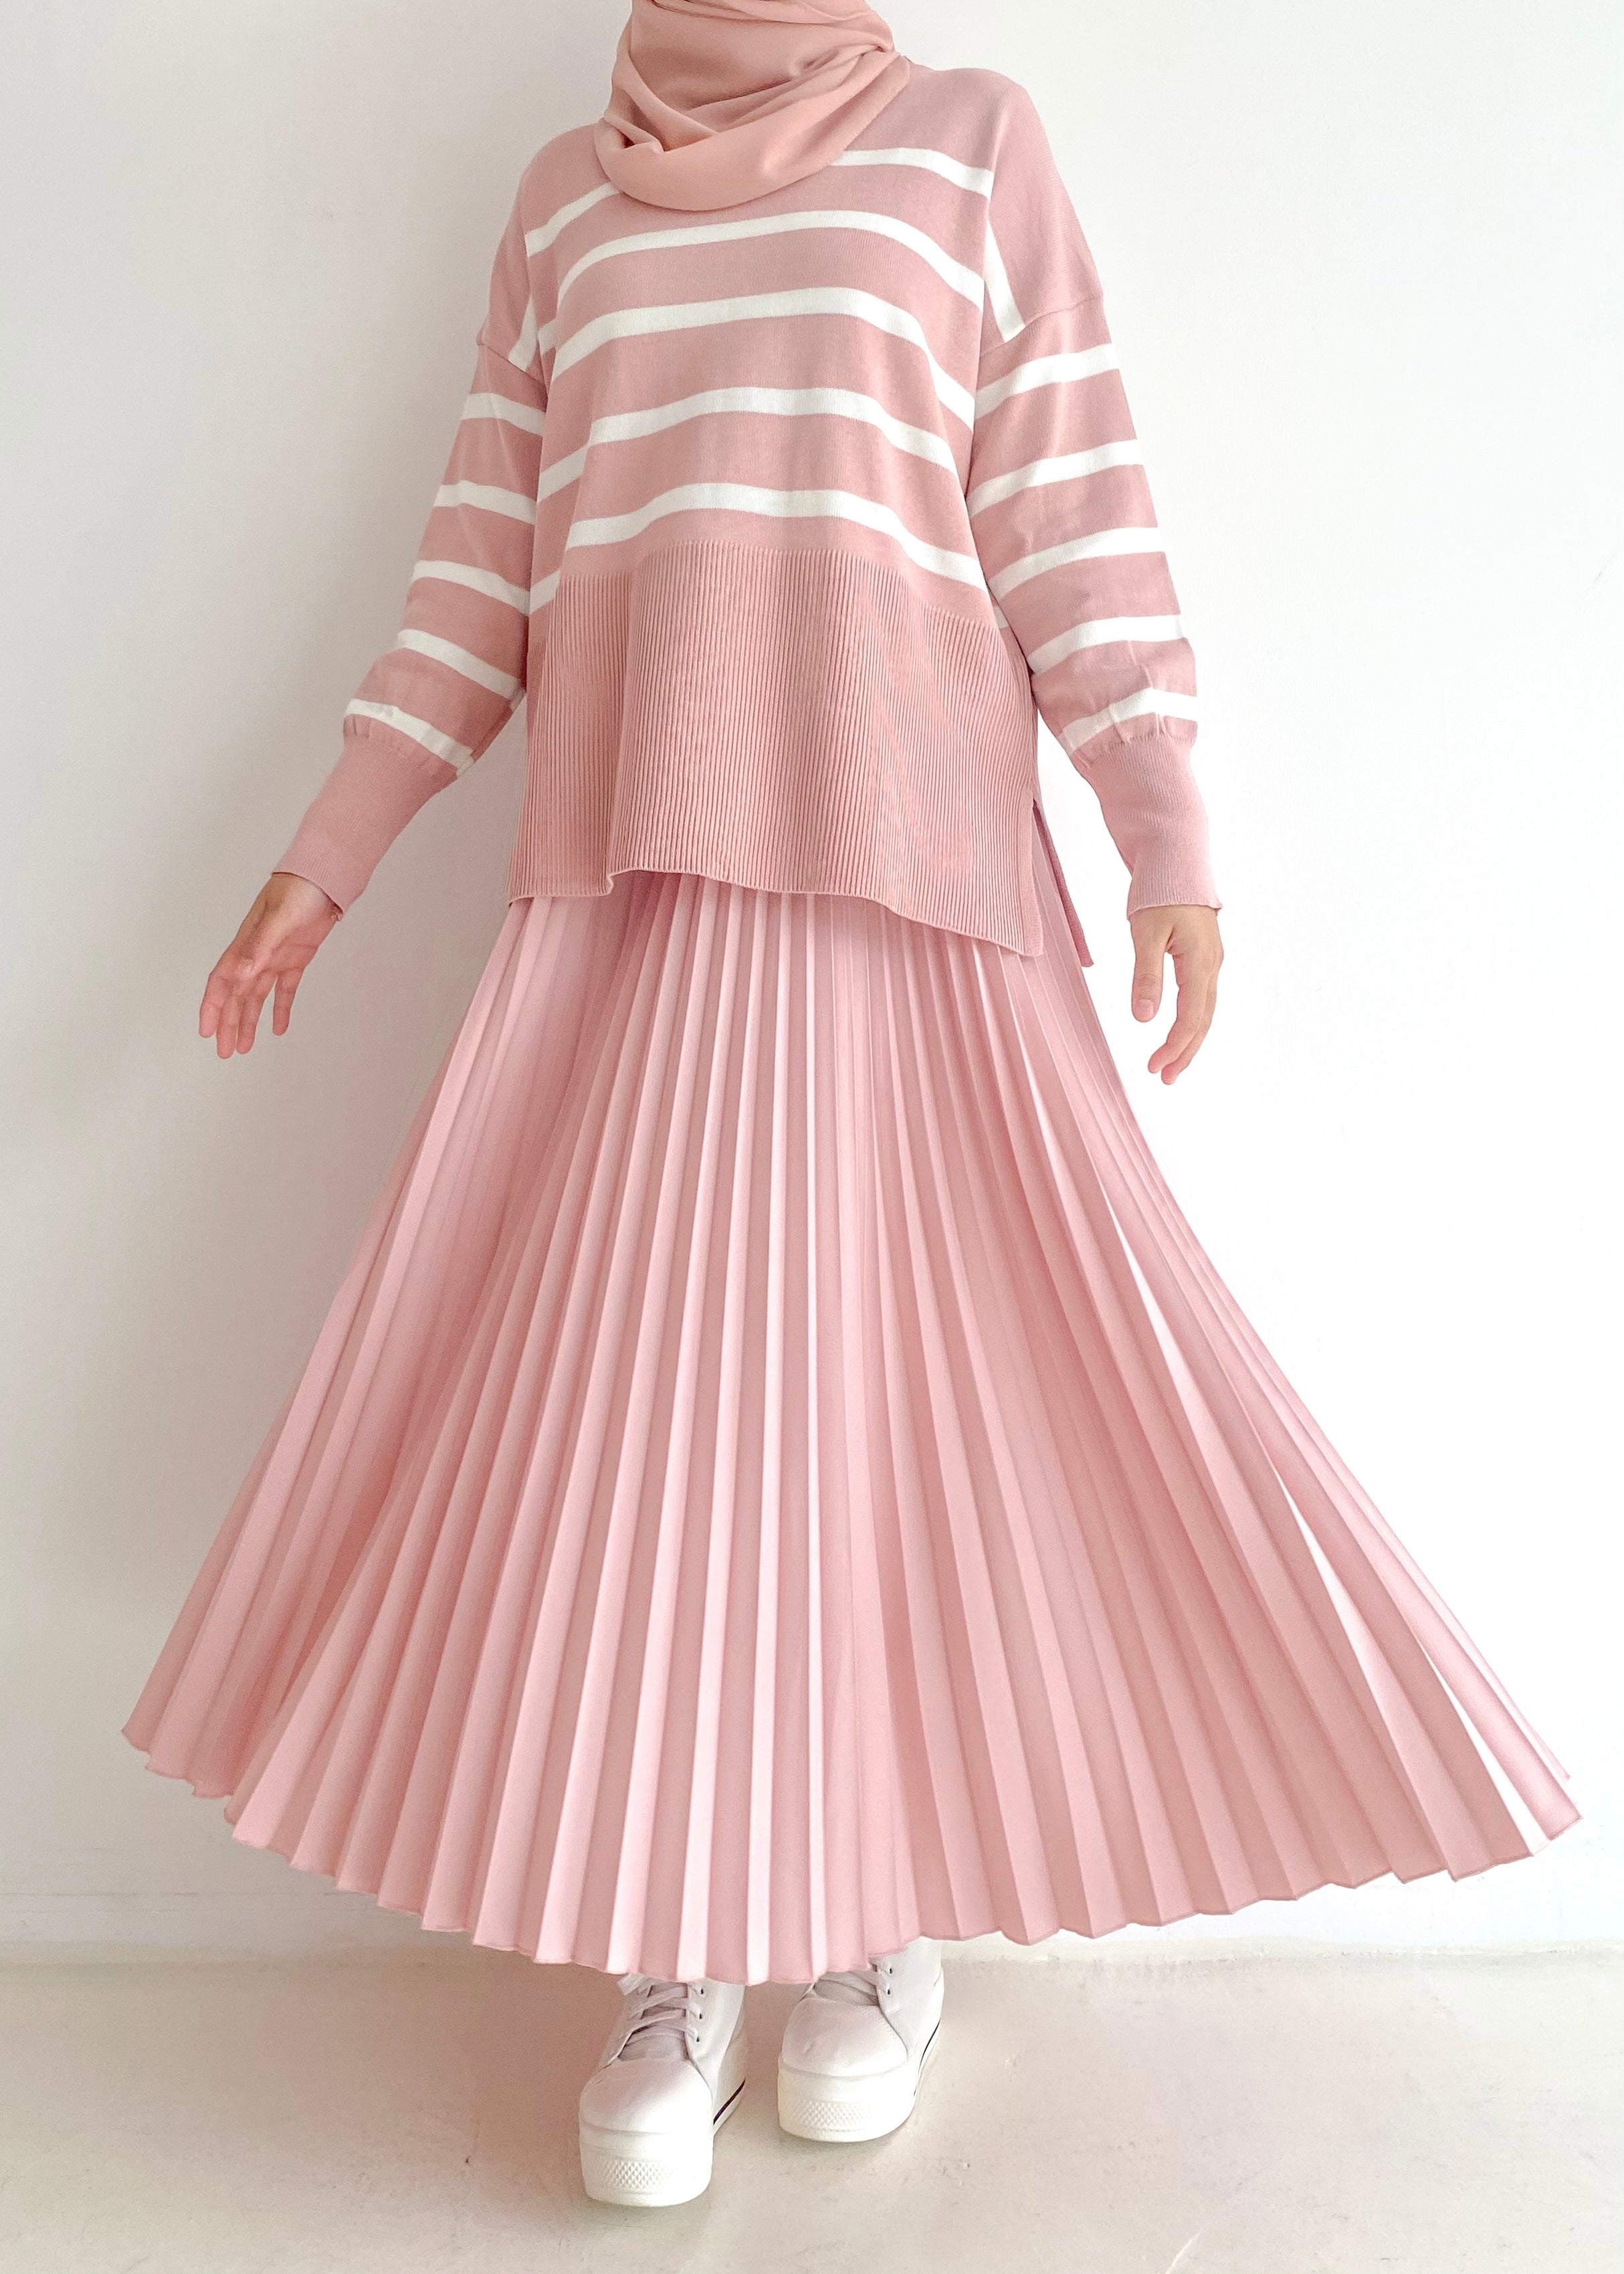 Evelyn Striped Top in Pastel Pink